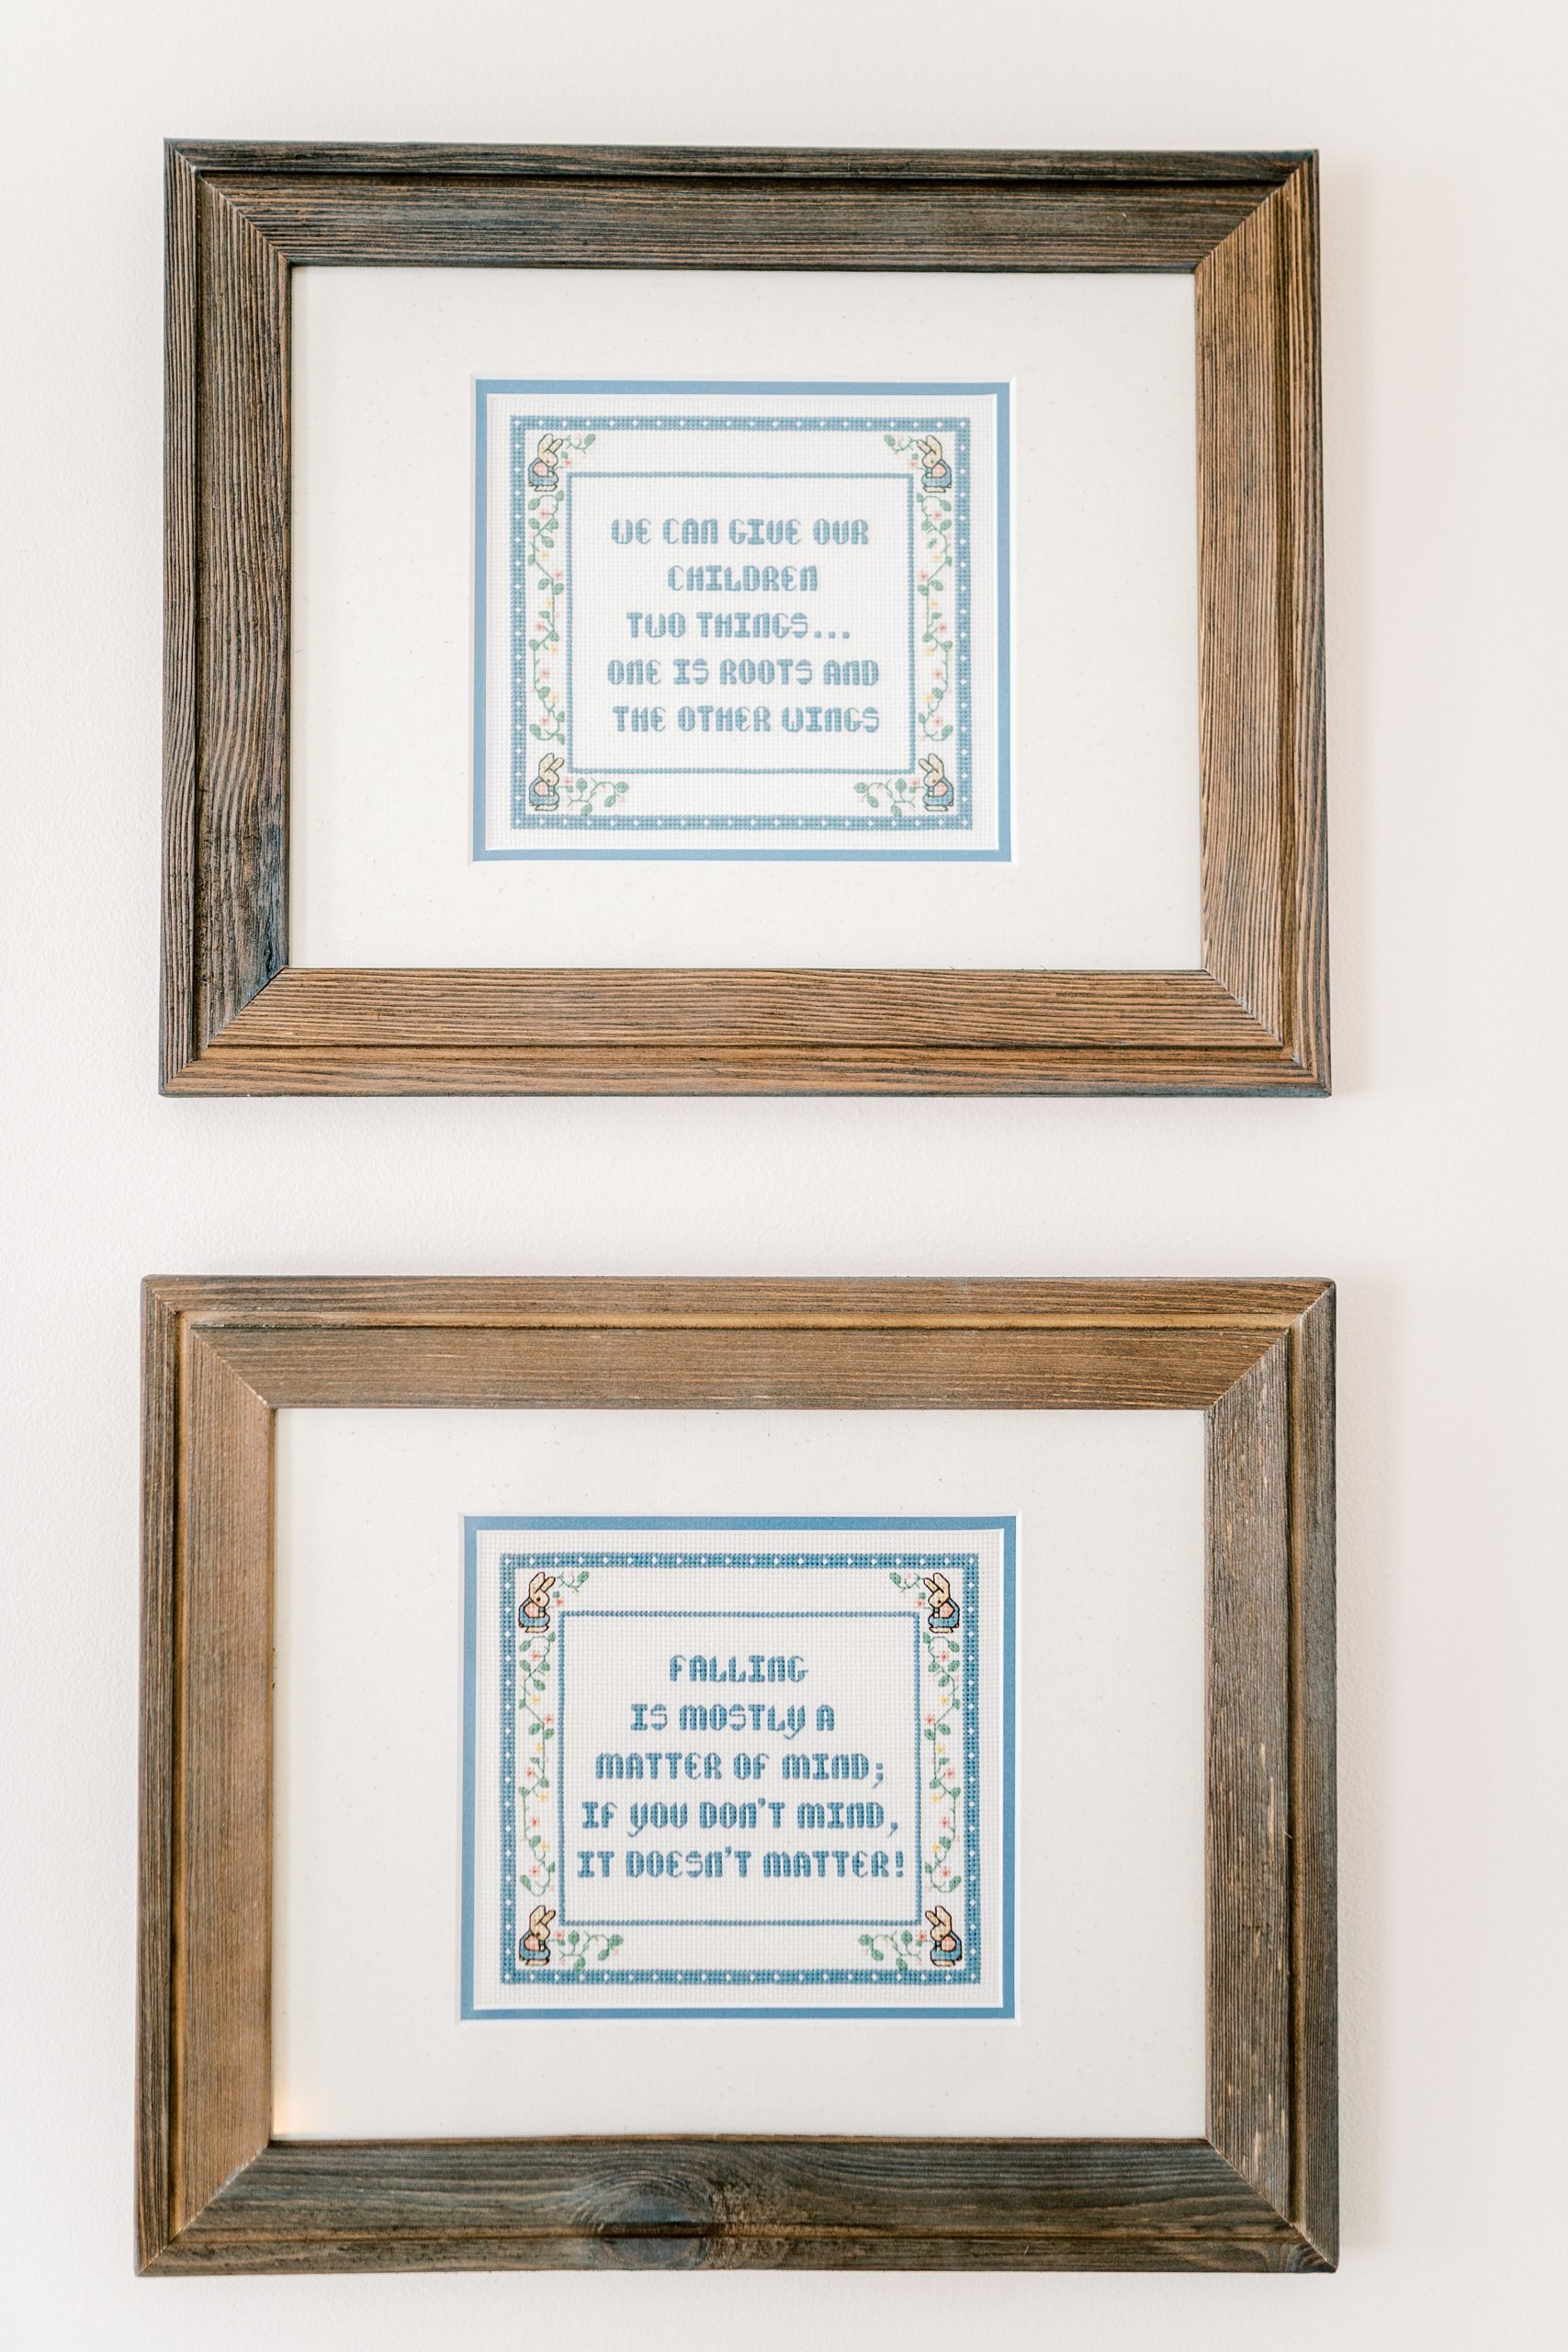 wall signs in nursery featured in Grace Paul Photography's monthly nursery spotlight